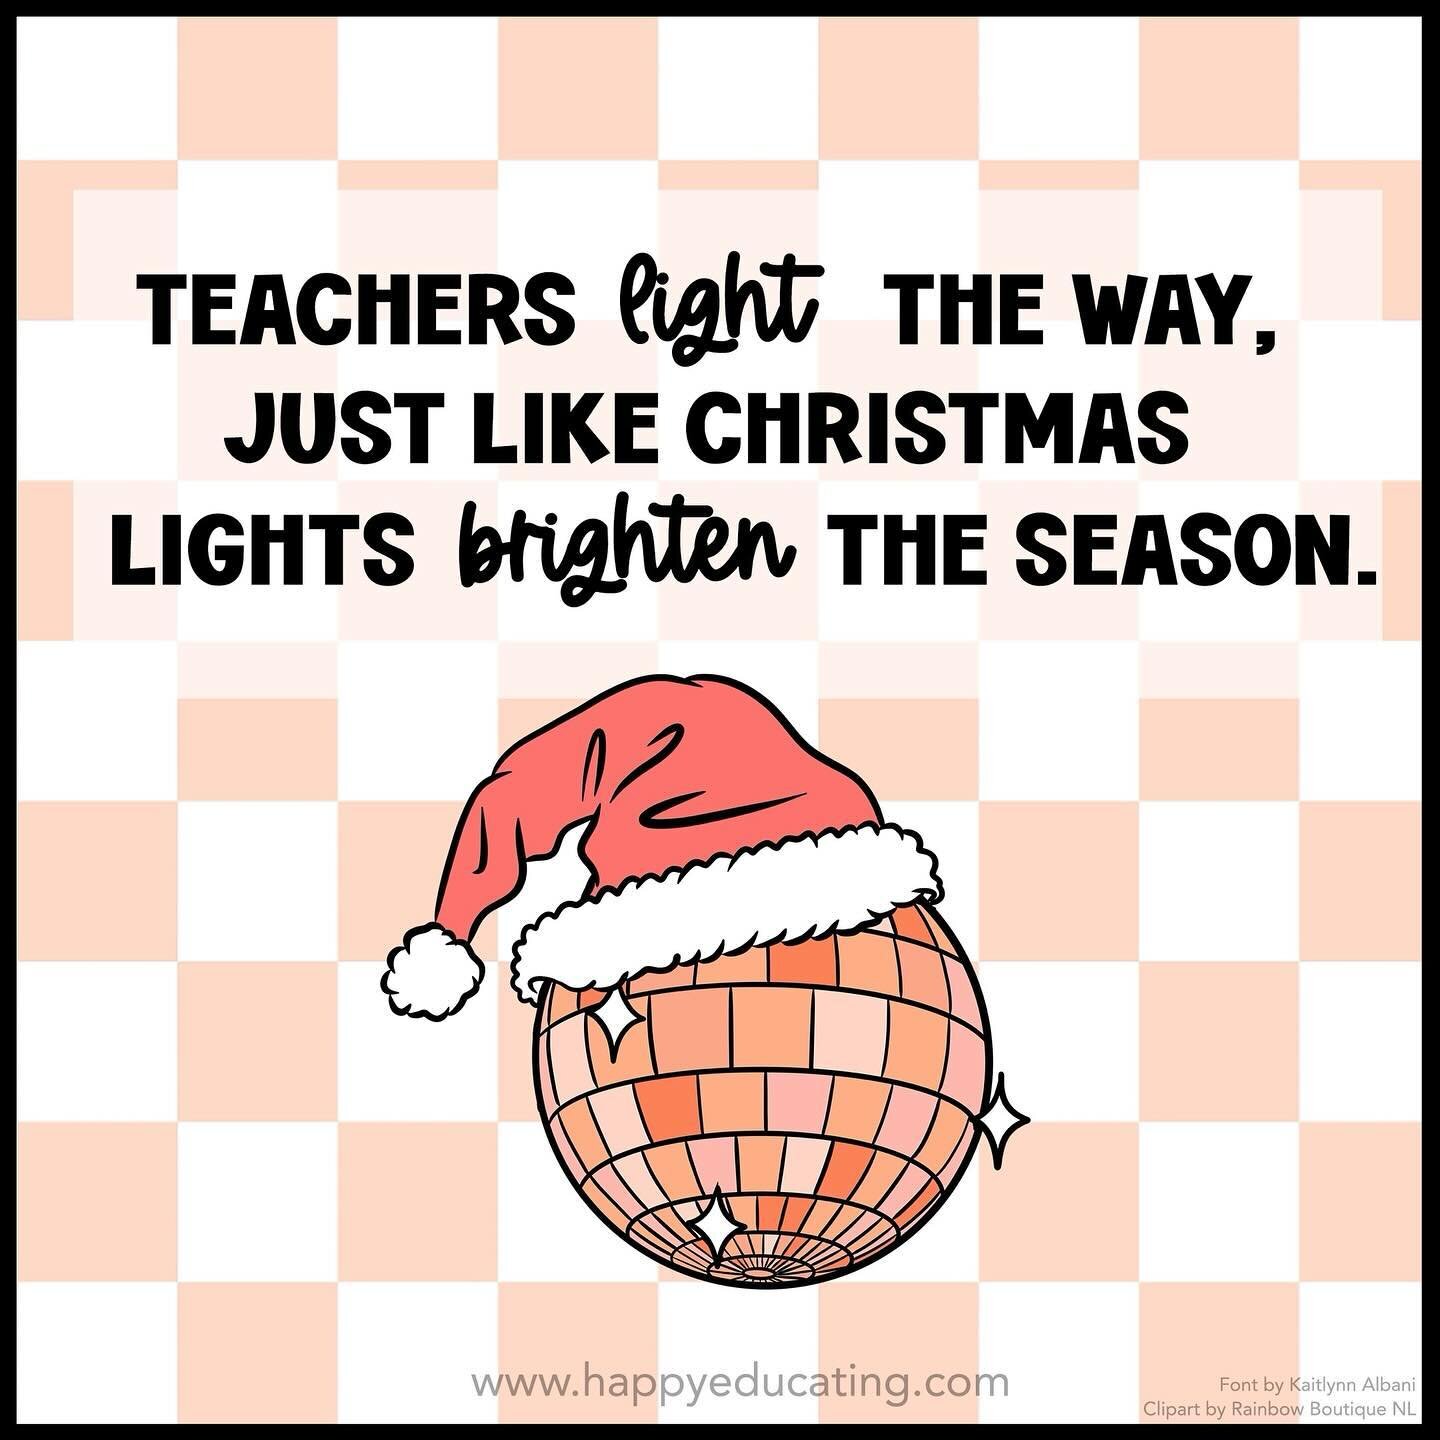 In the heart of education, teachers shine bright like Christmas lights, illuminating the path of knowledge for their students. This season, let&rsquo;s celebrate the educators who light up minds and create a warm, joyful atmosphere in every classroom